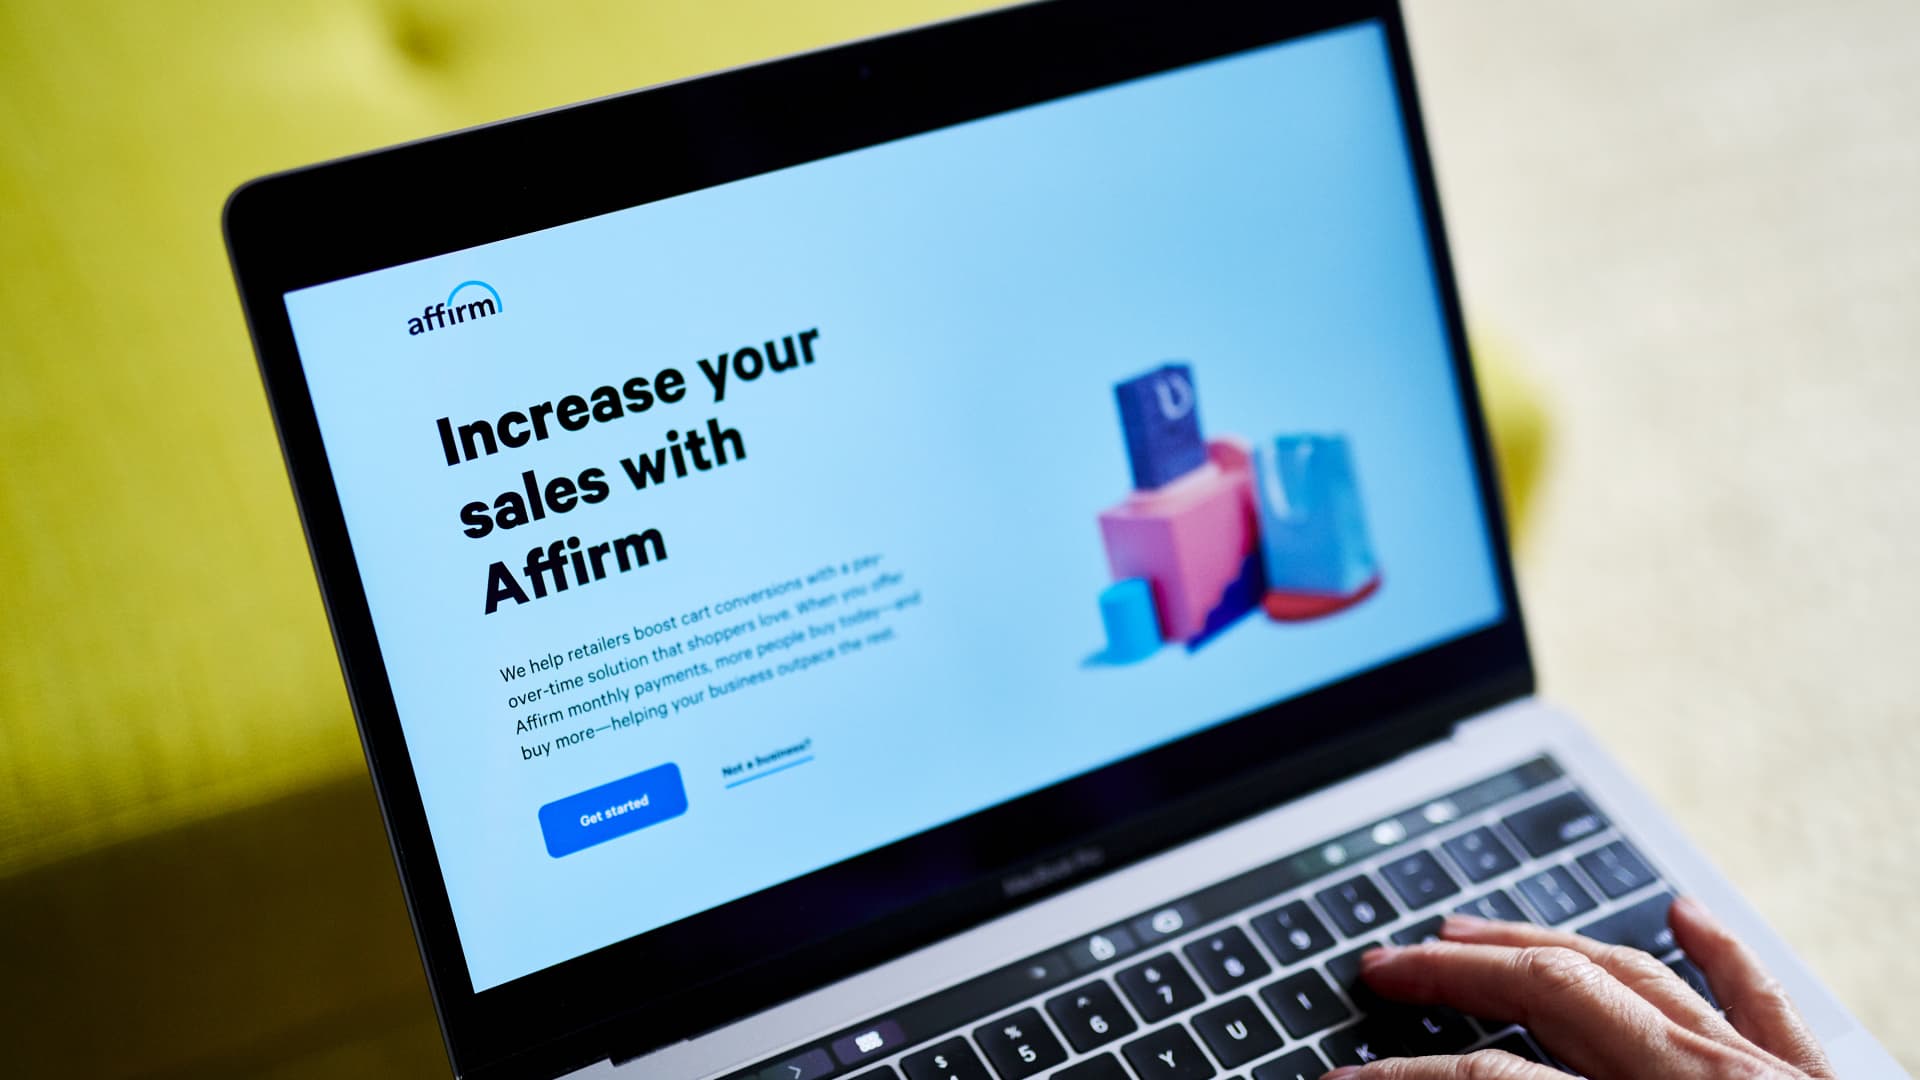 Affirm shares rocket 29% after better-than-expected results and strong guidance